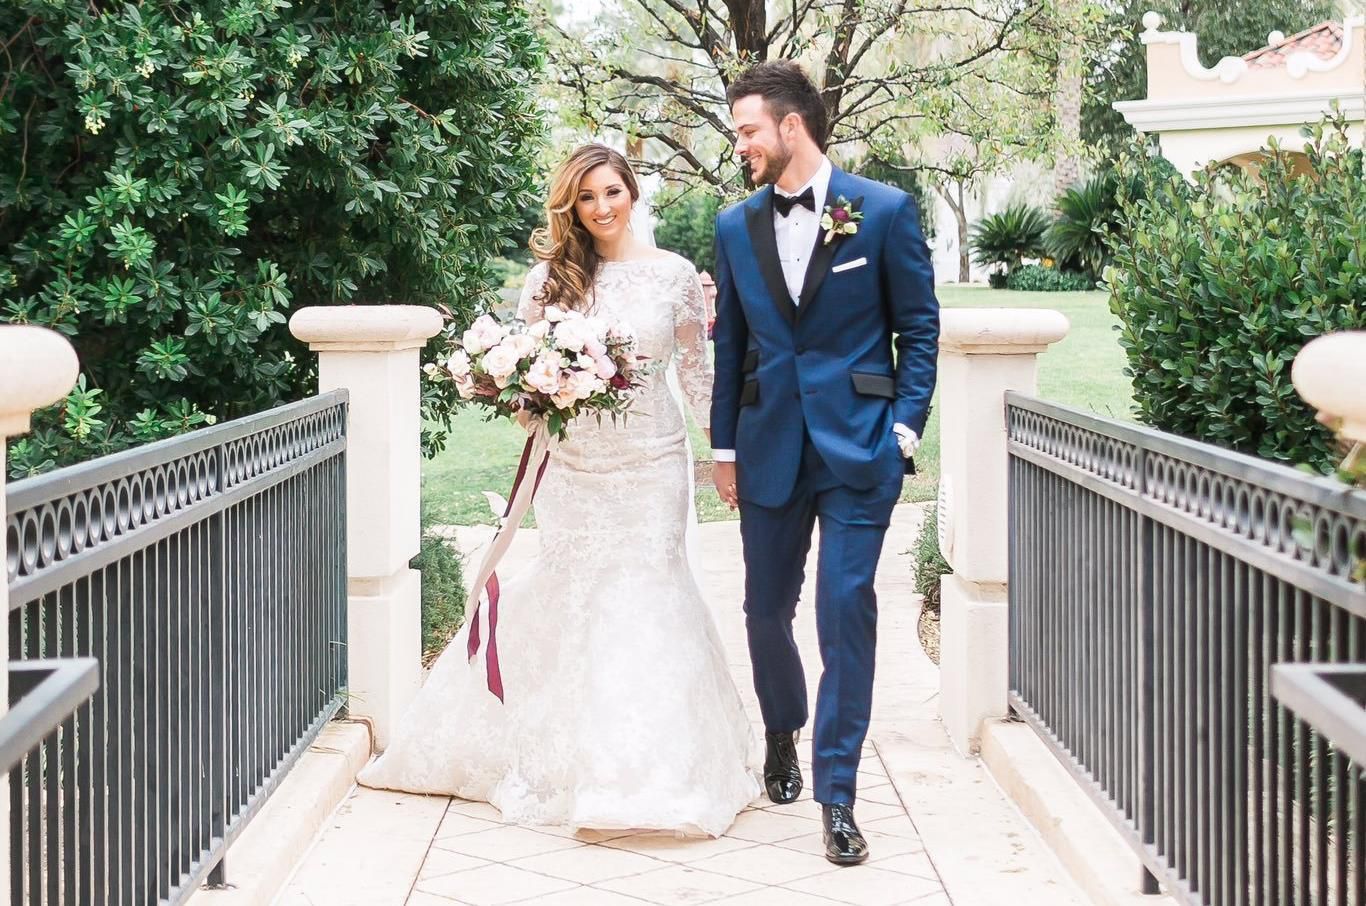 Check out these adorable photos from Kris Bryant's Las Vegas wedding